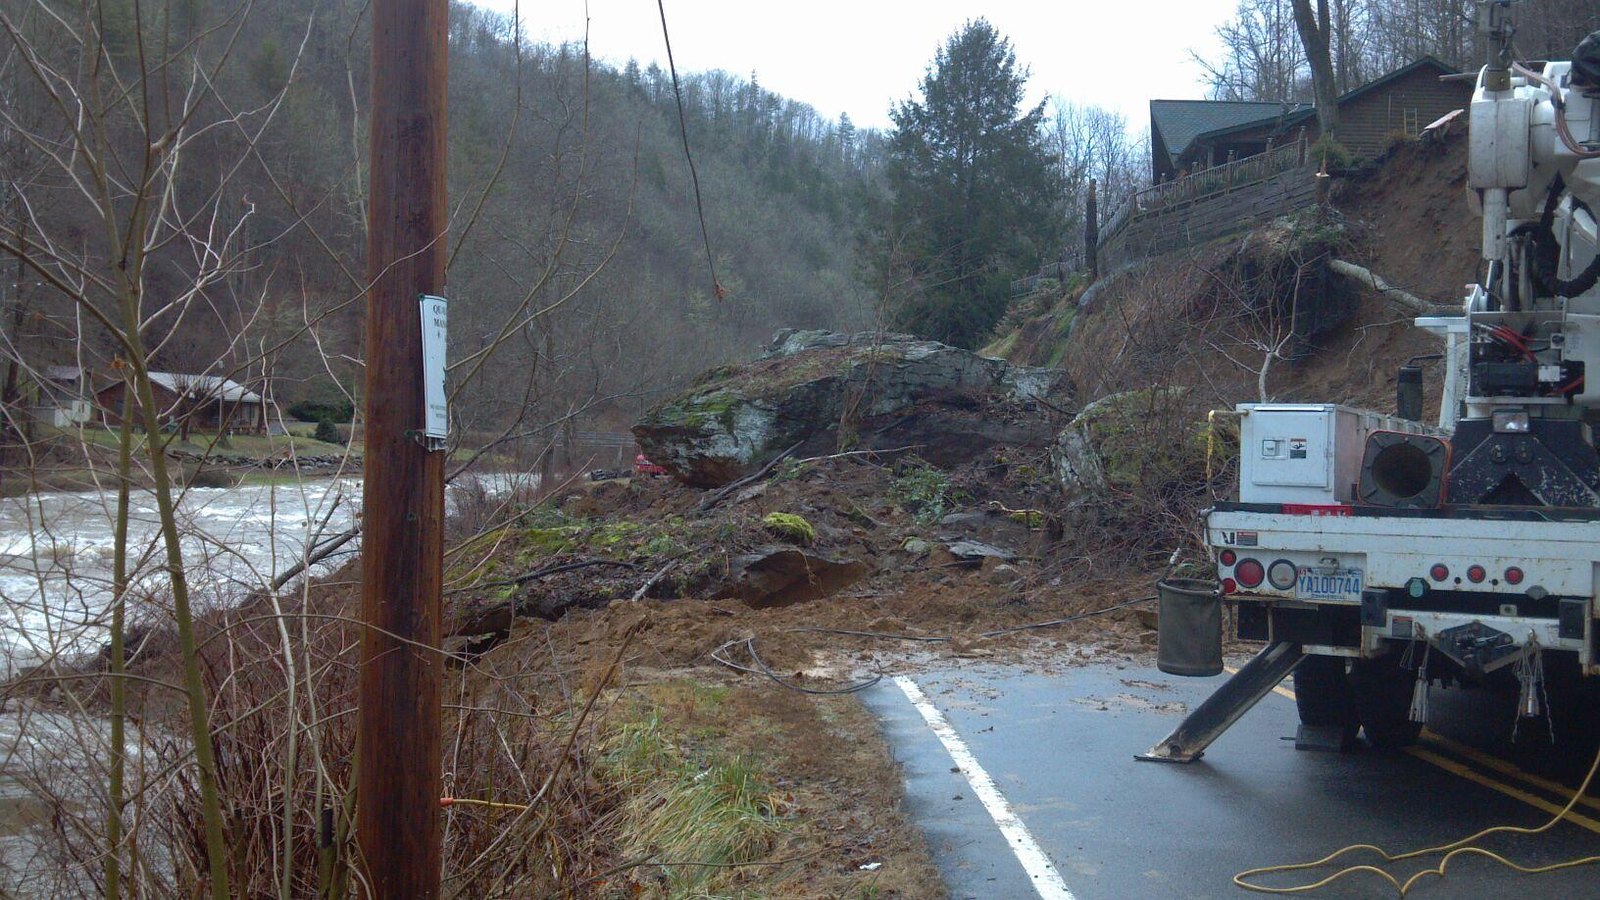 Mudslide on US 19, Yancey County, NC; image by NCDOTcommunications, via Flickr.com, CC BY 2.0.